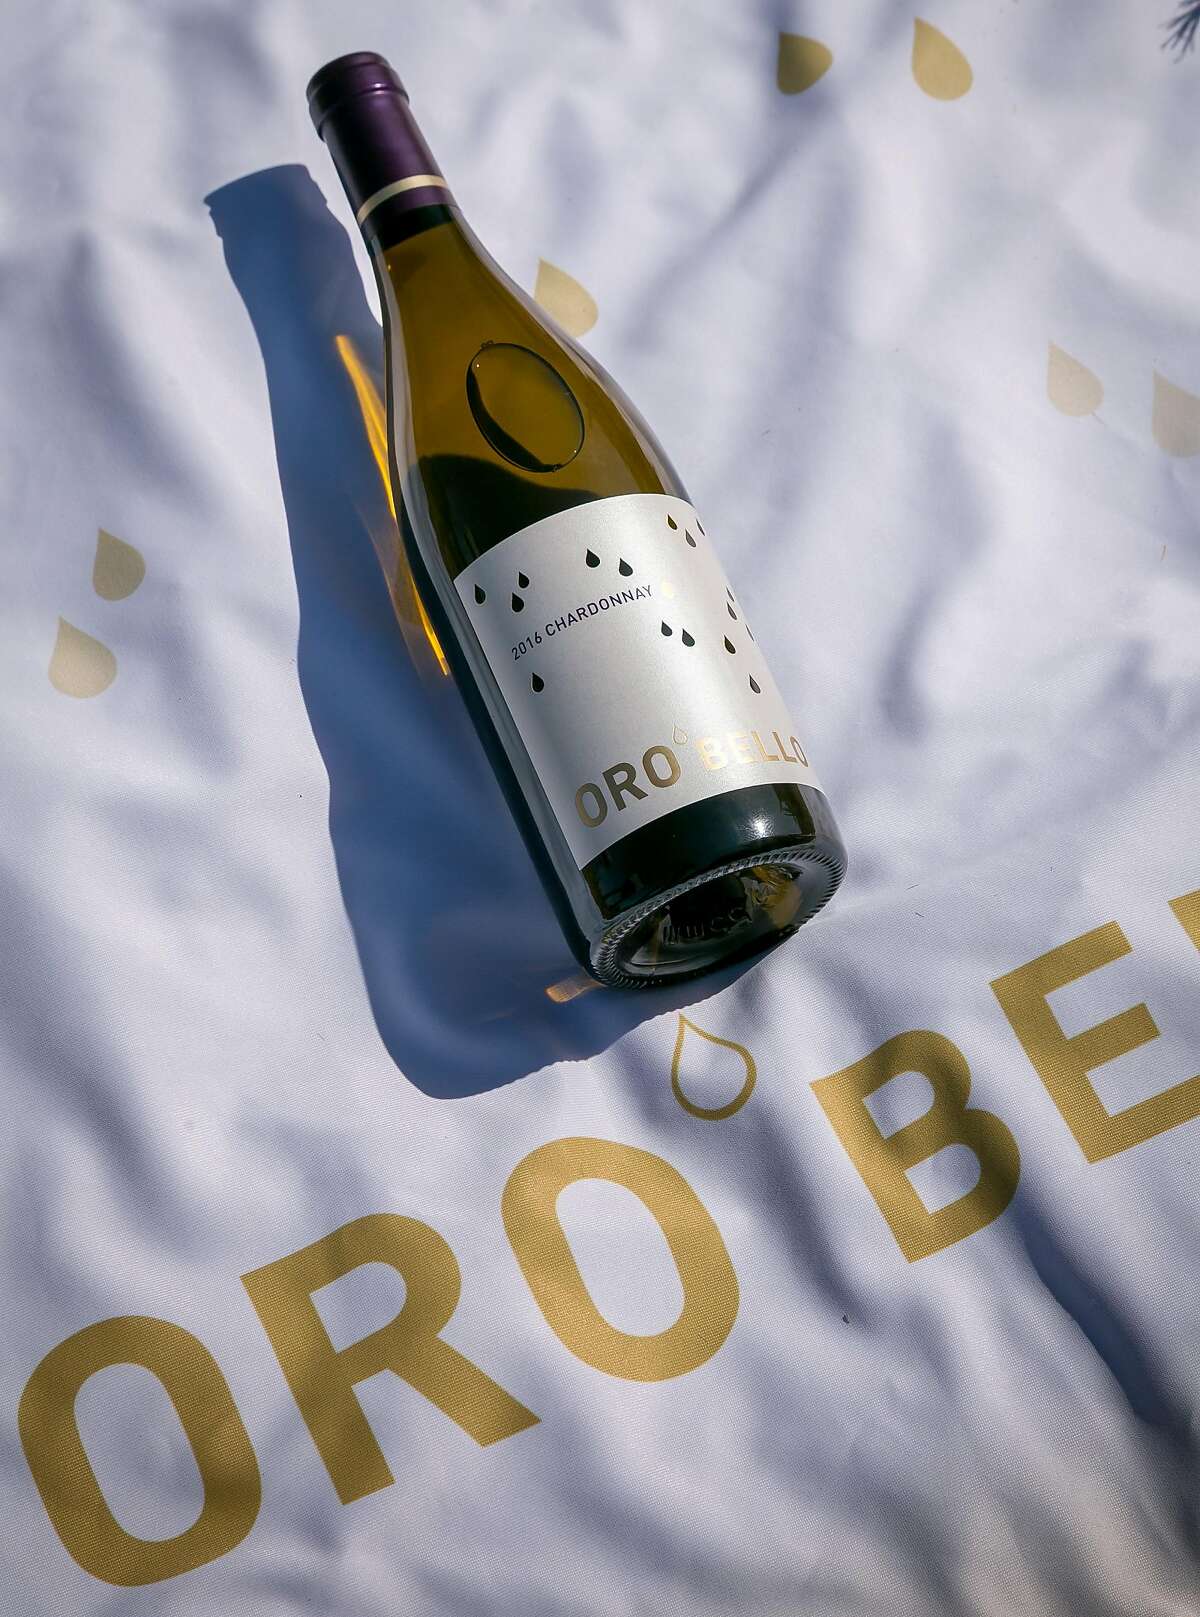 Marketing materials for Atlas Wine Co., whose lineup includes the $17.99 Oro Bello Chardonnay.